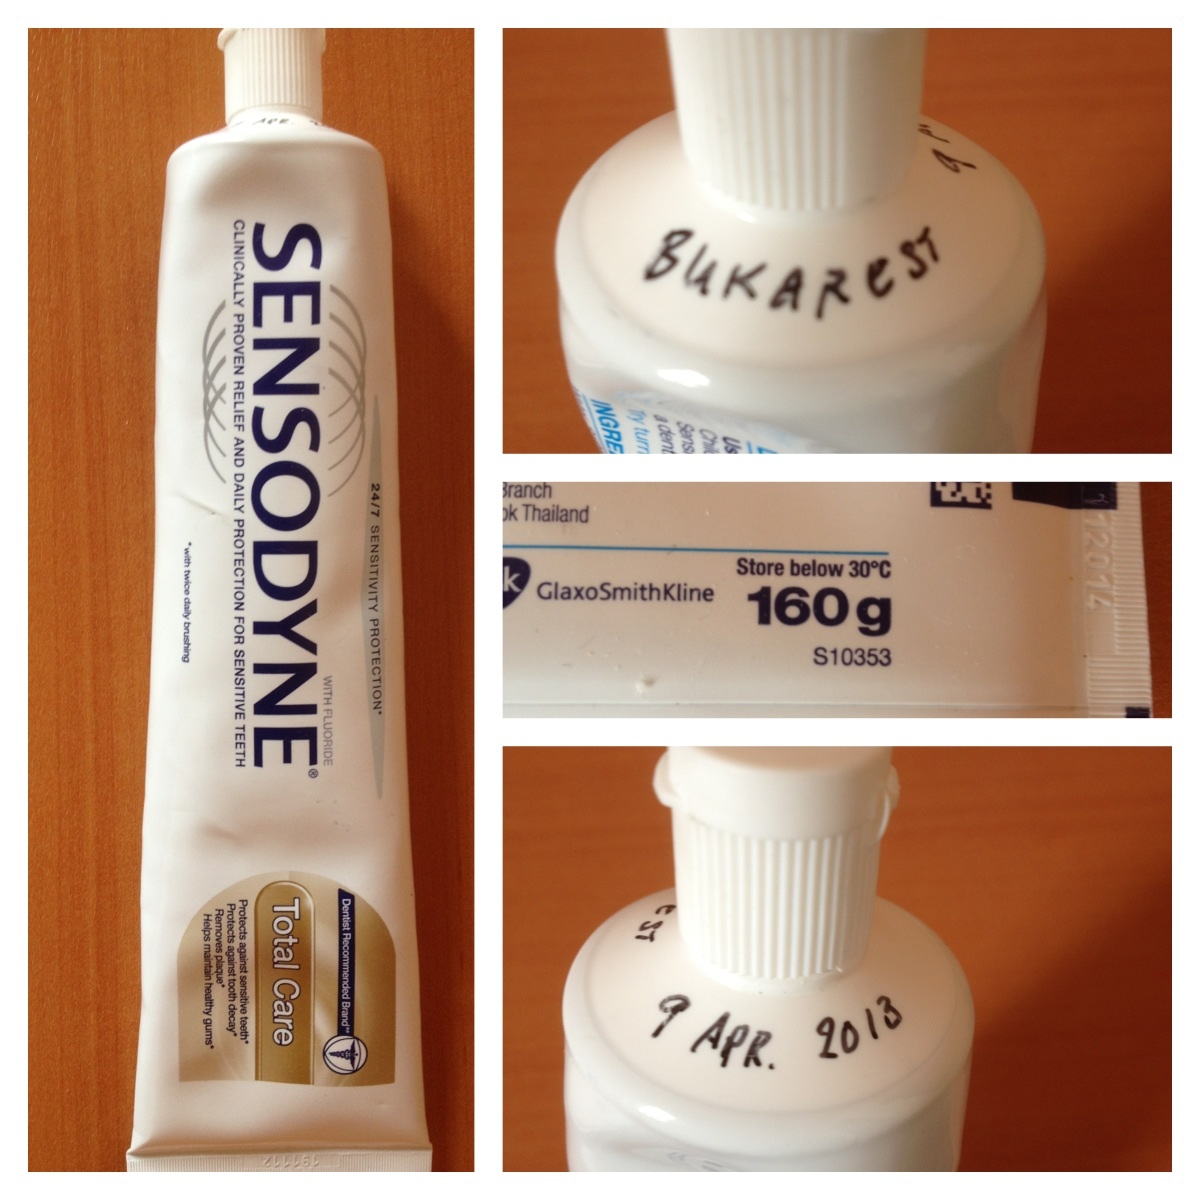 Our toothpaste tube with markings of day, place and amount... :-)